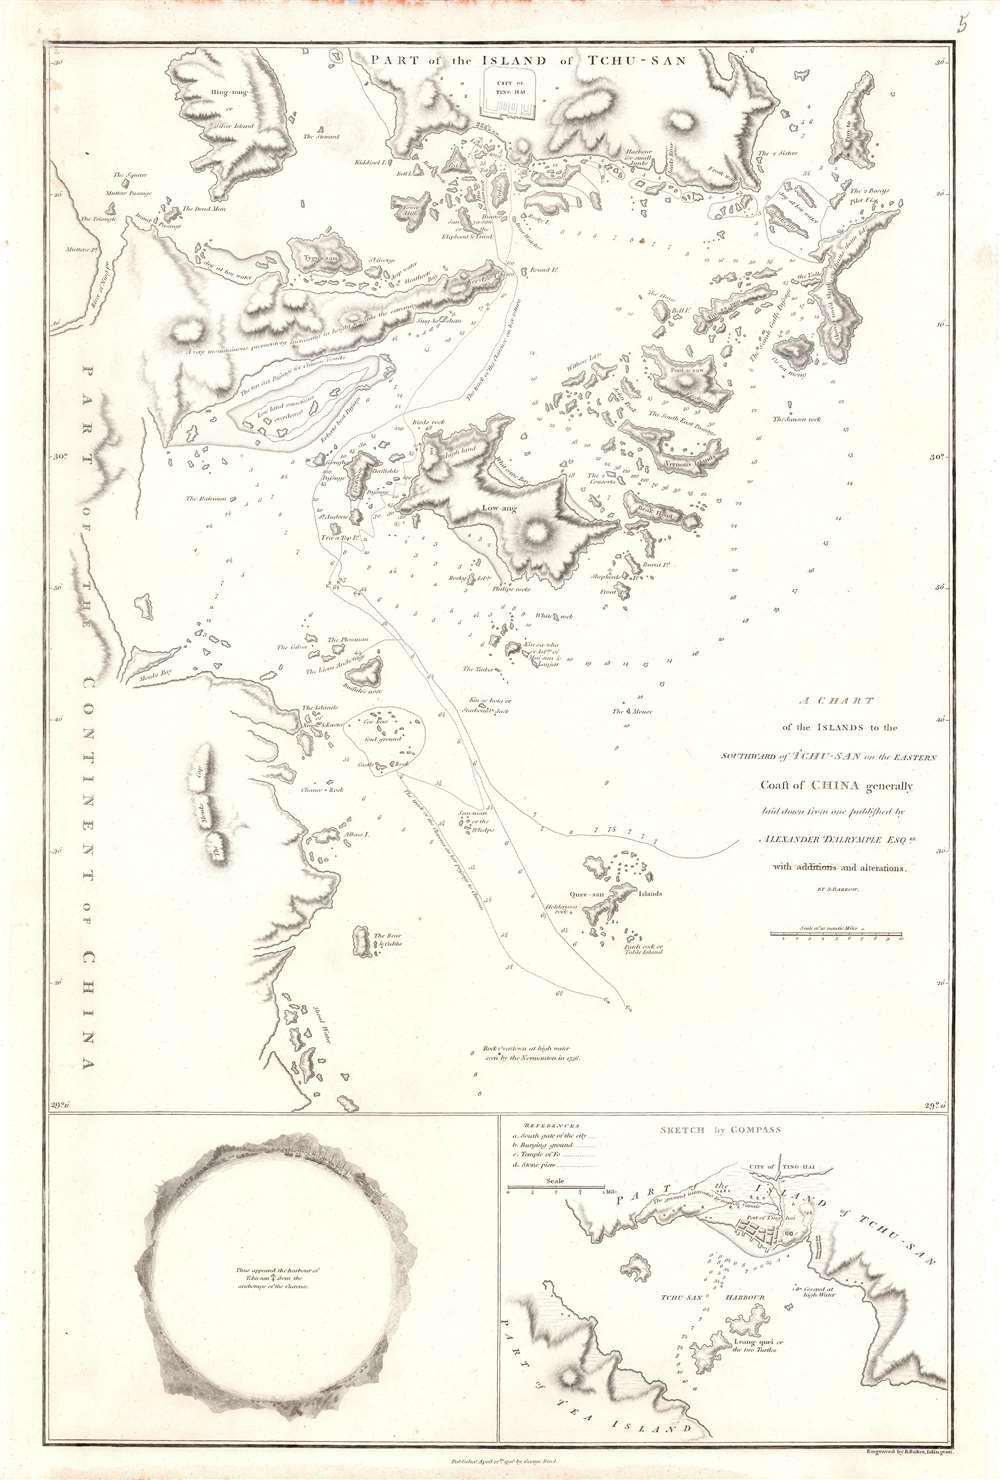 A Chart of the Islands to the Southward of Tchu-san on the Eastern Coast of China generally laid down from one published by Alexander Dalrymple Esqre. with additions and alternations. - Main View